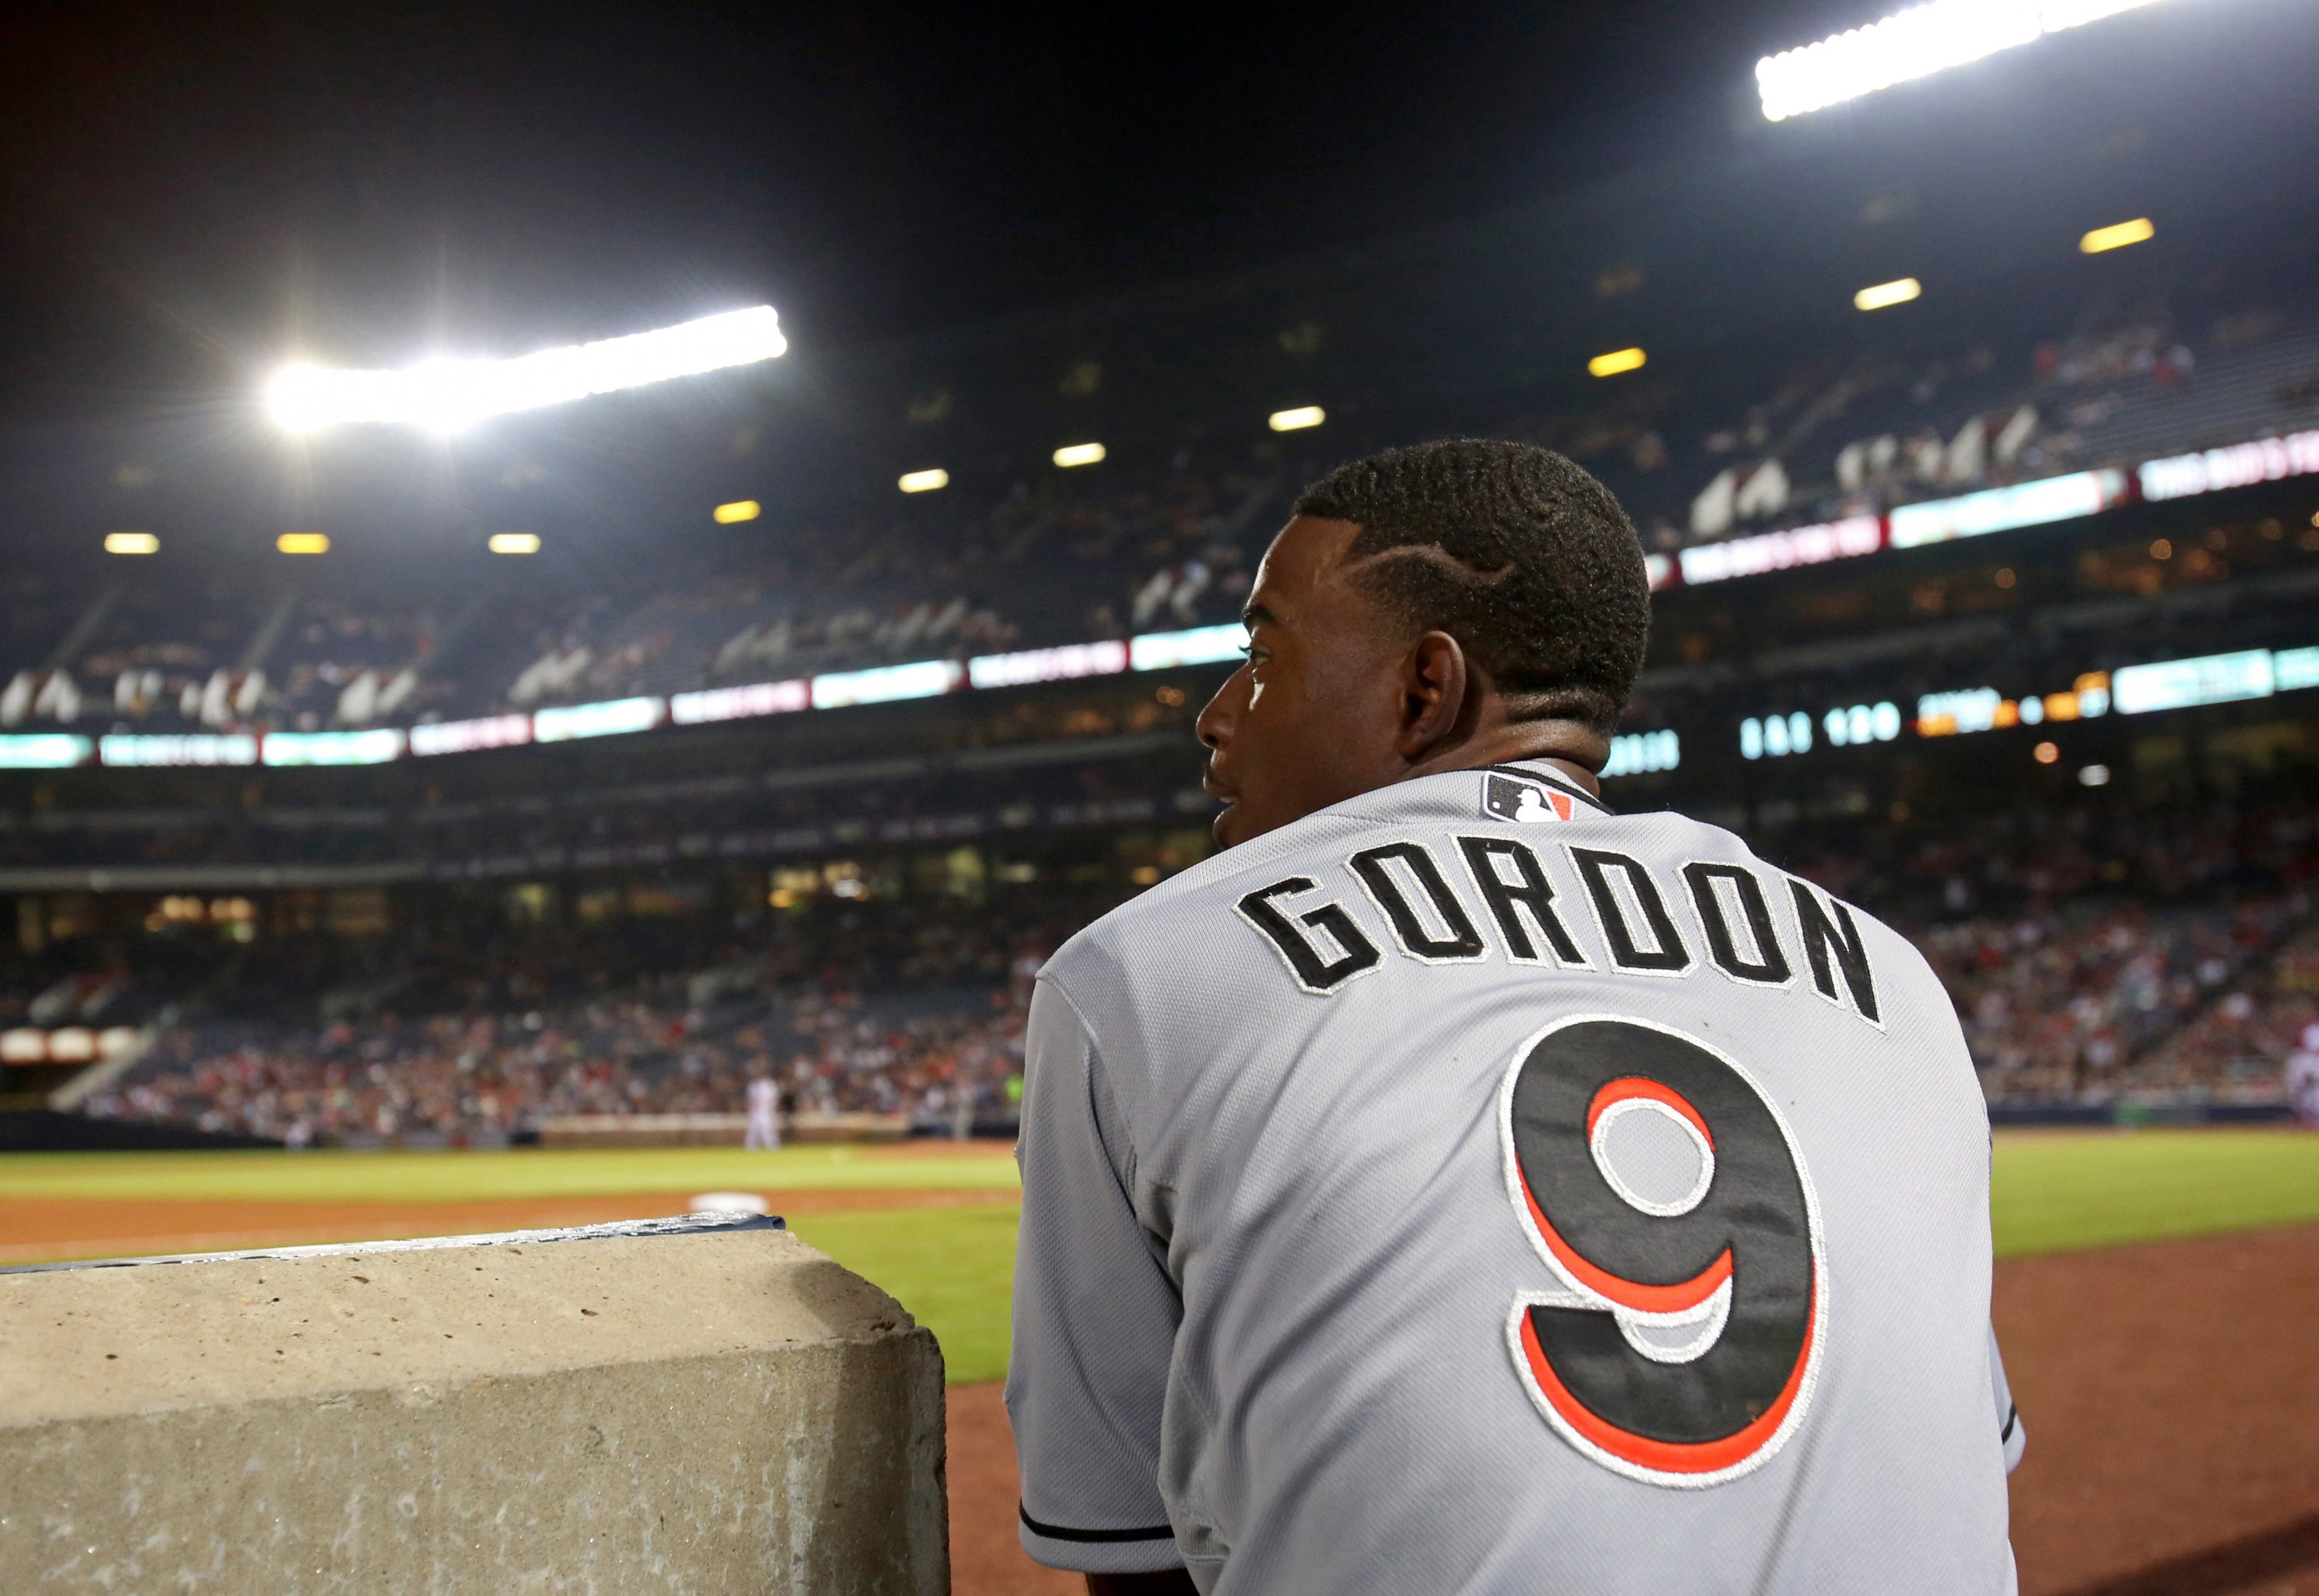 Dee Gordon's friend isn't surprised he turned to PEDs - Fish Stripes